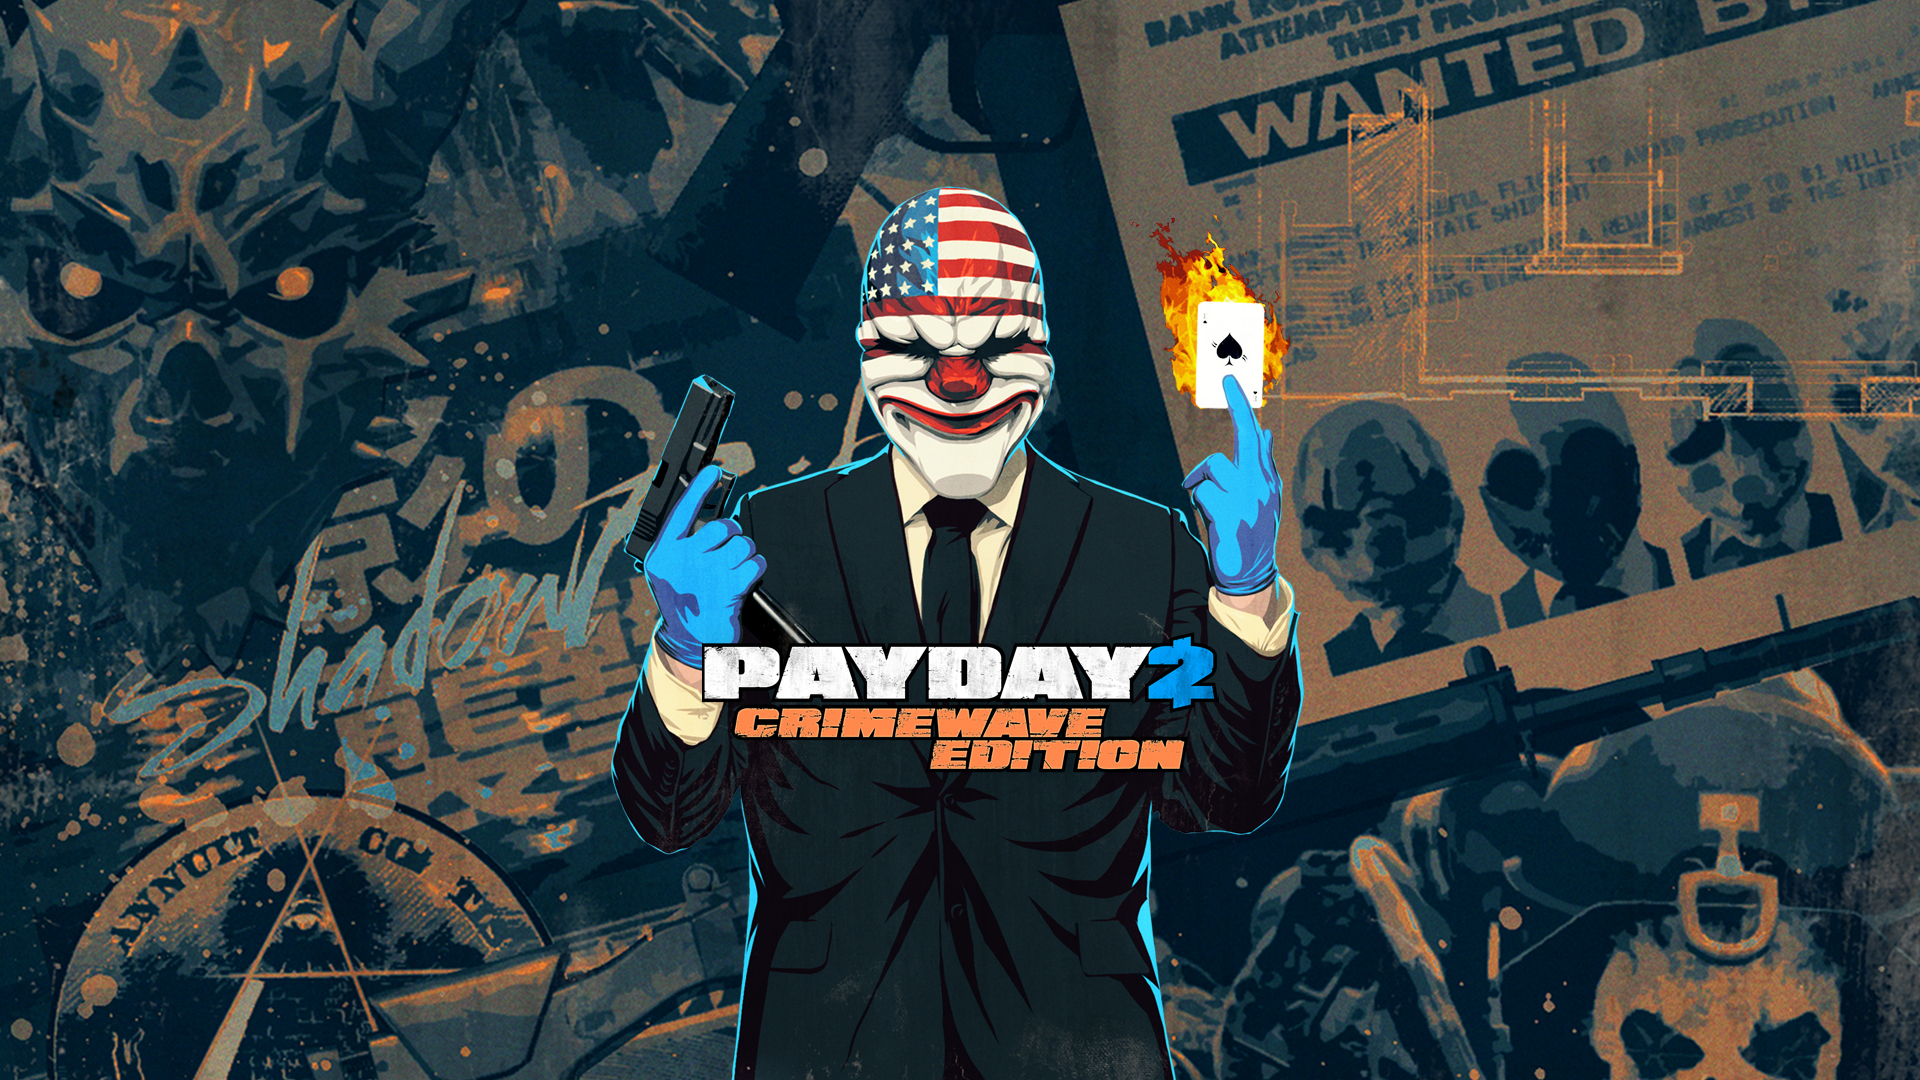 Game one payday 2 фото 23